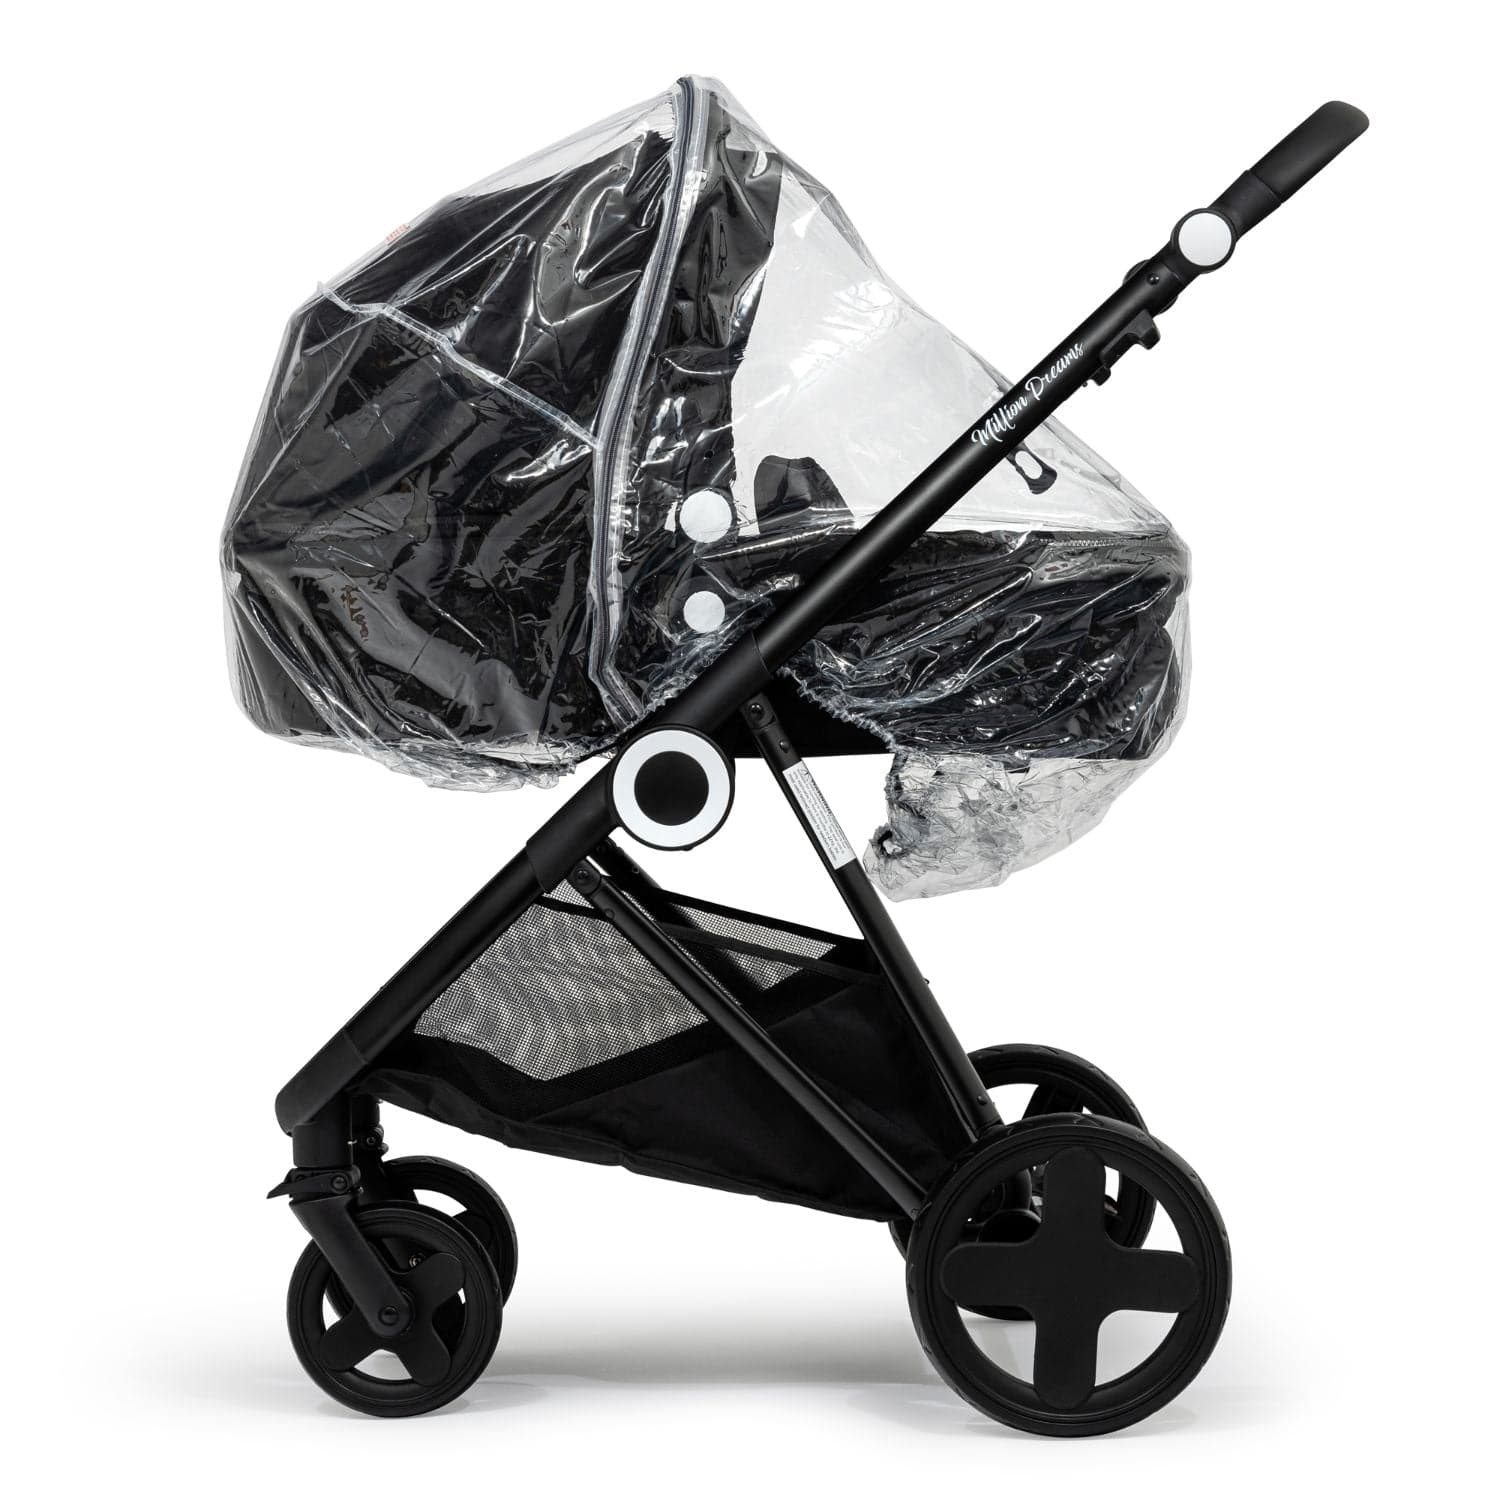 Carrycot Raincover Compatible With Zooper - Fits All Models - For Your Little One